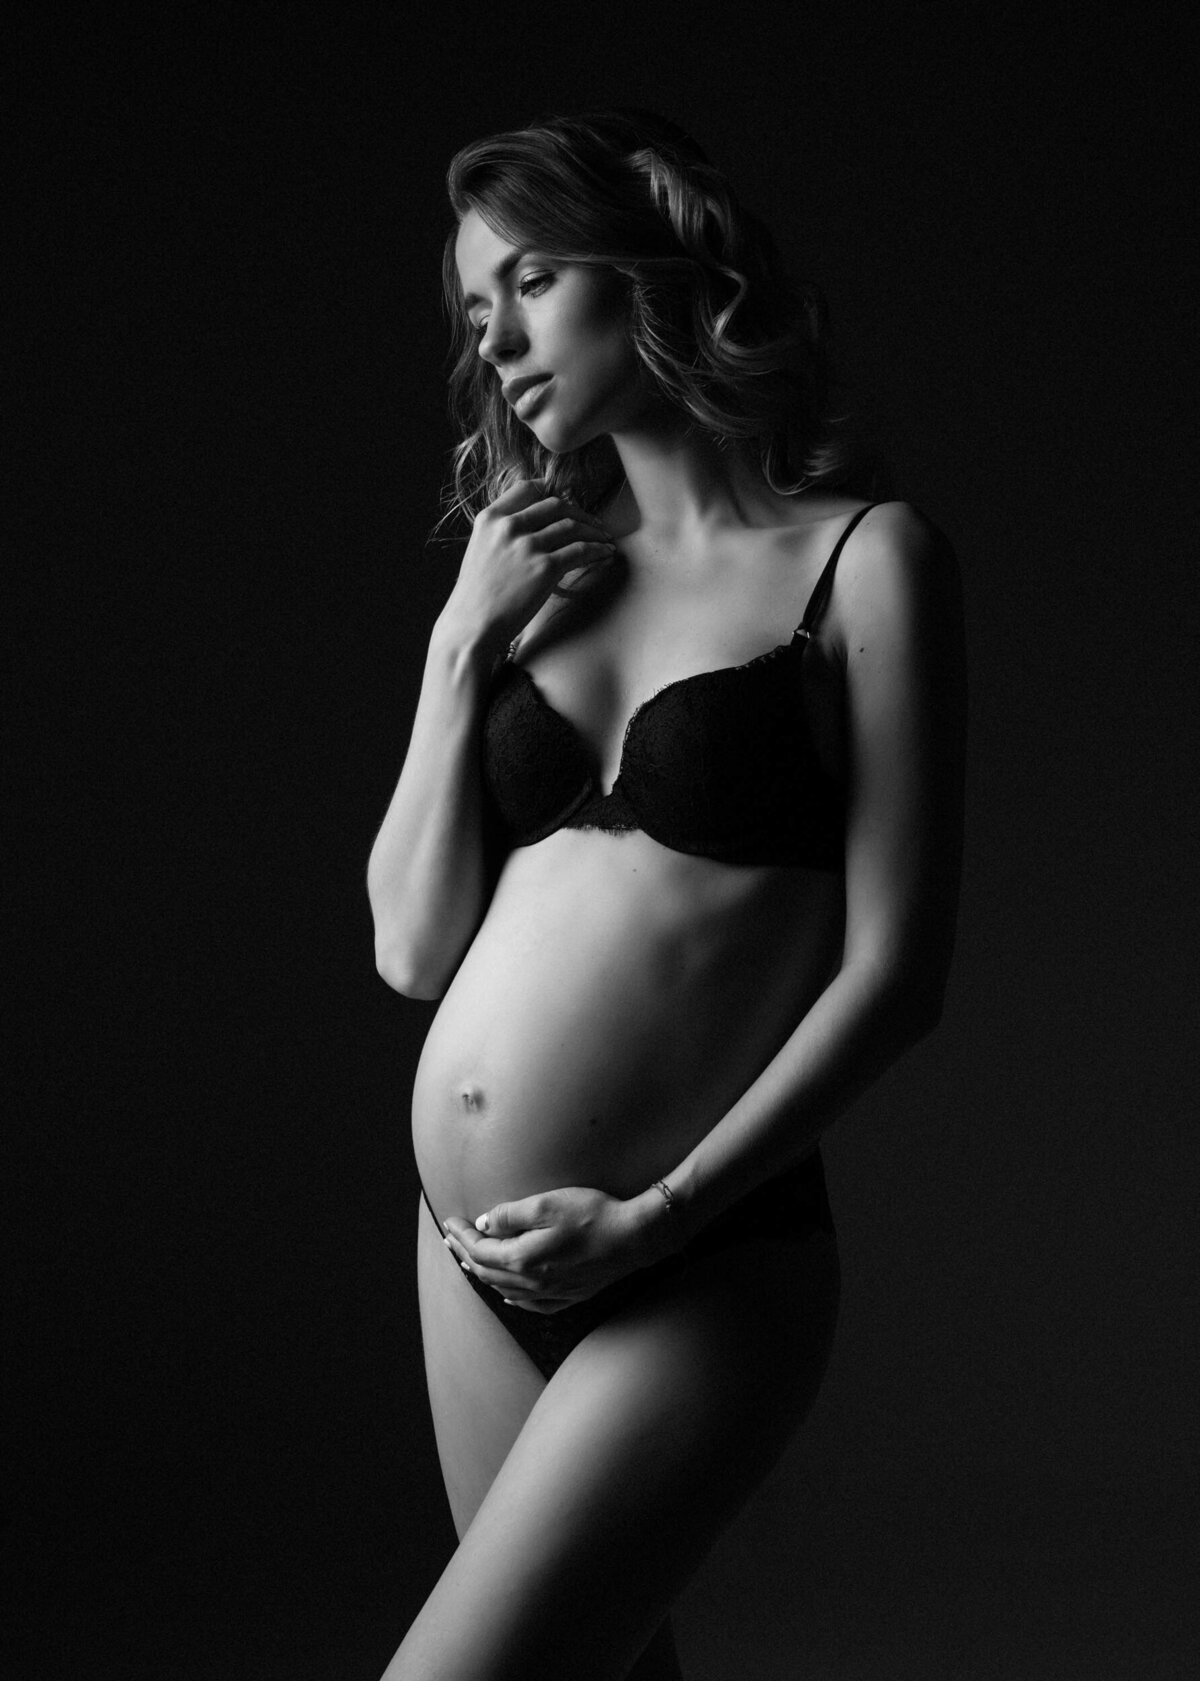 Artistic Lighting for Maternity Photography Course by Lola Melani-6